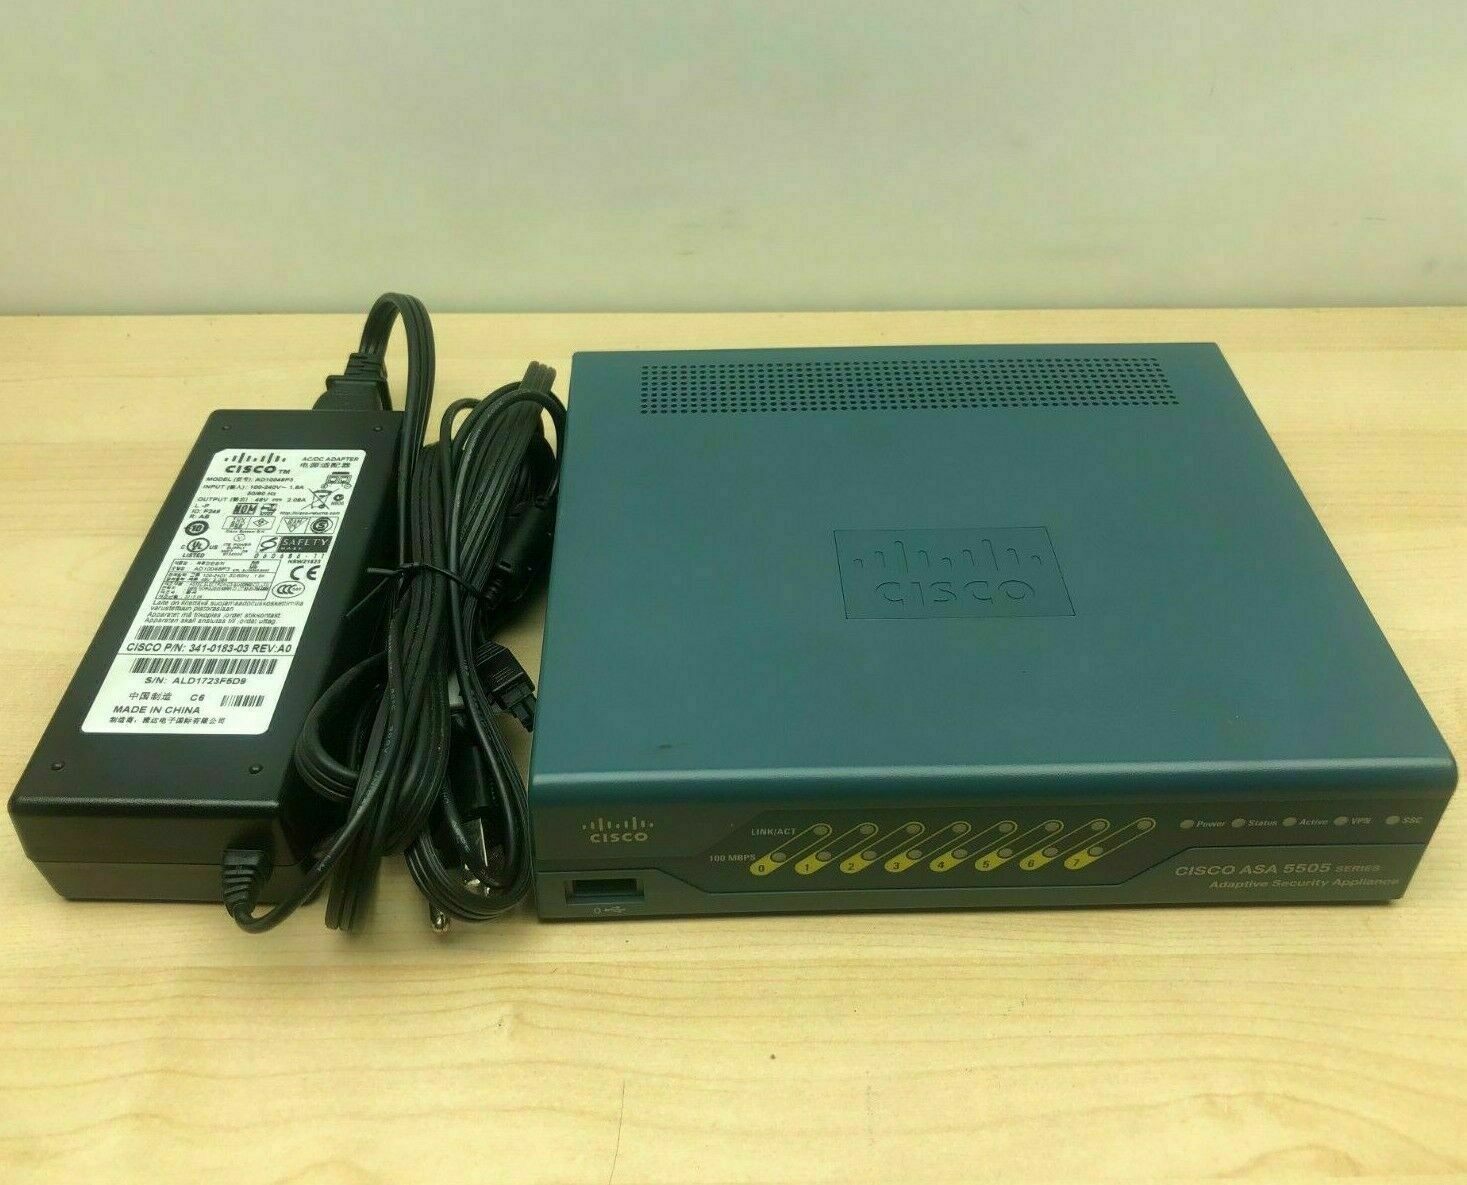 NEW OUT OF BOX Cisco ASA 5505 Series Adaptive Security Appliance